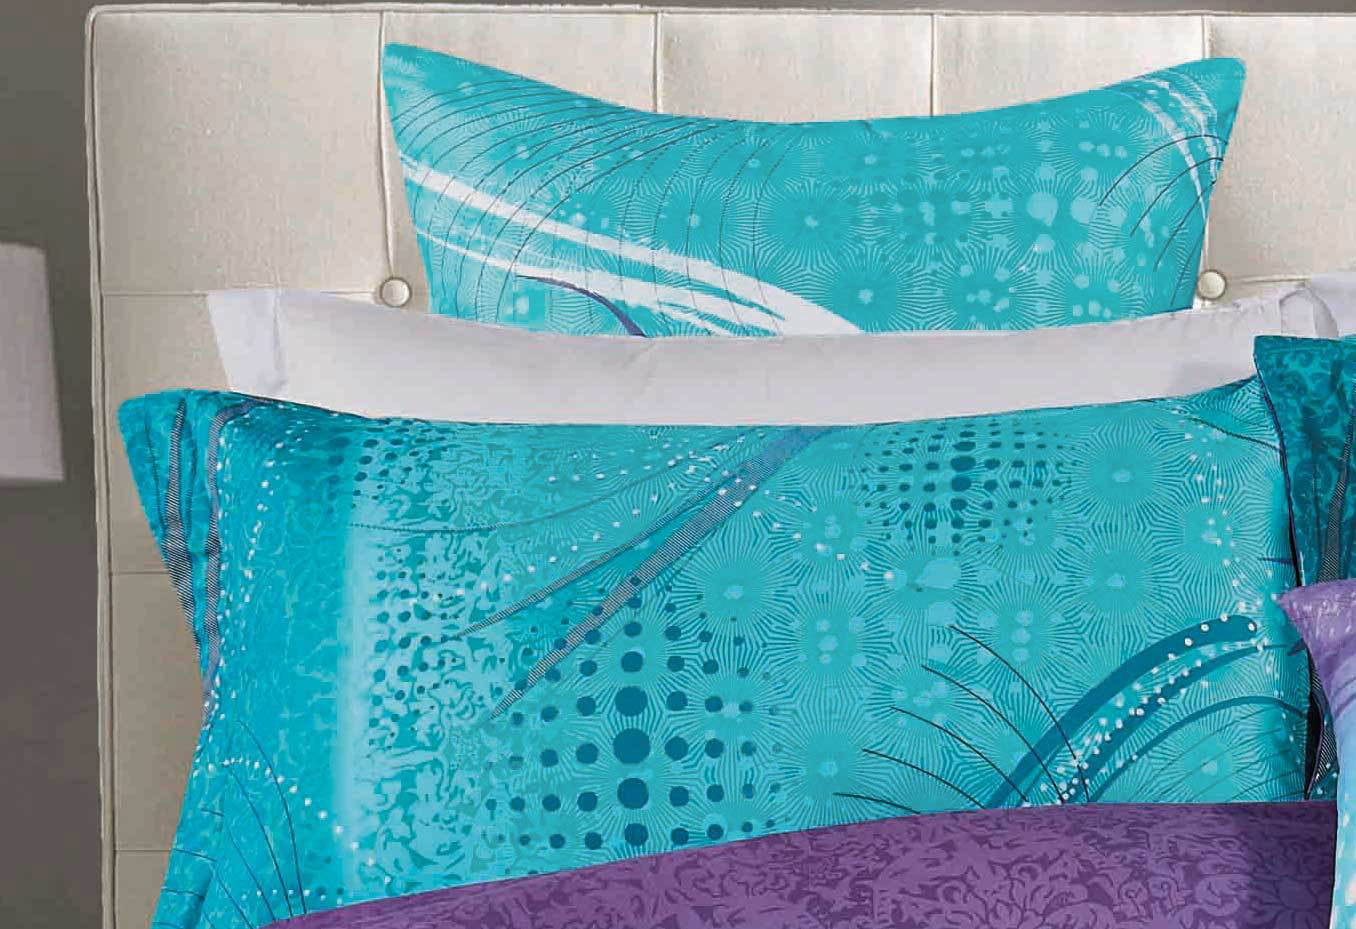 Zephyr aqua turquoise Quilt Cover / doona cover set | Manchester Direct